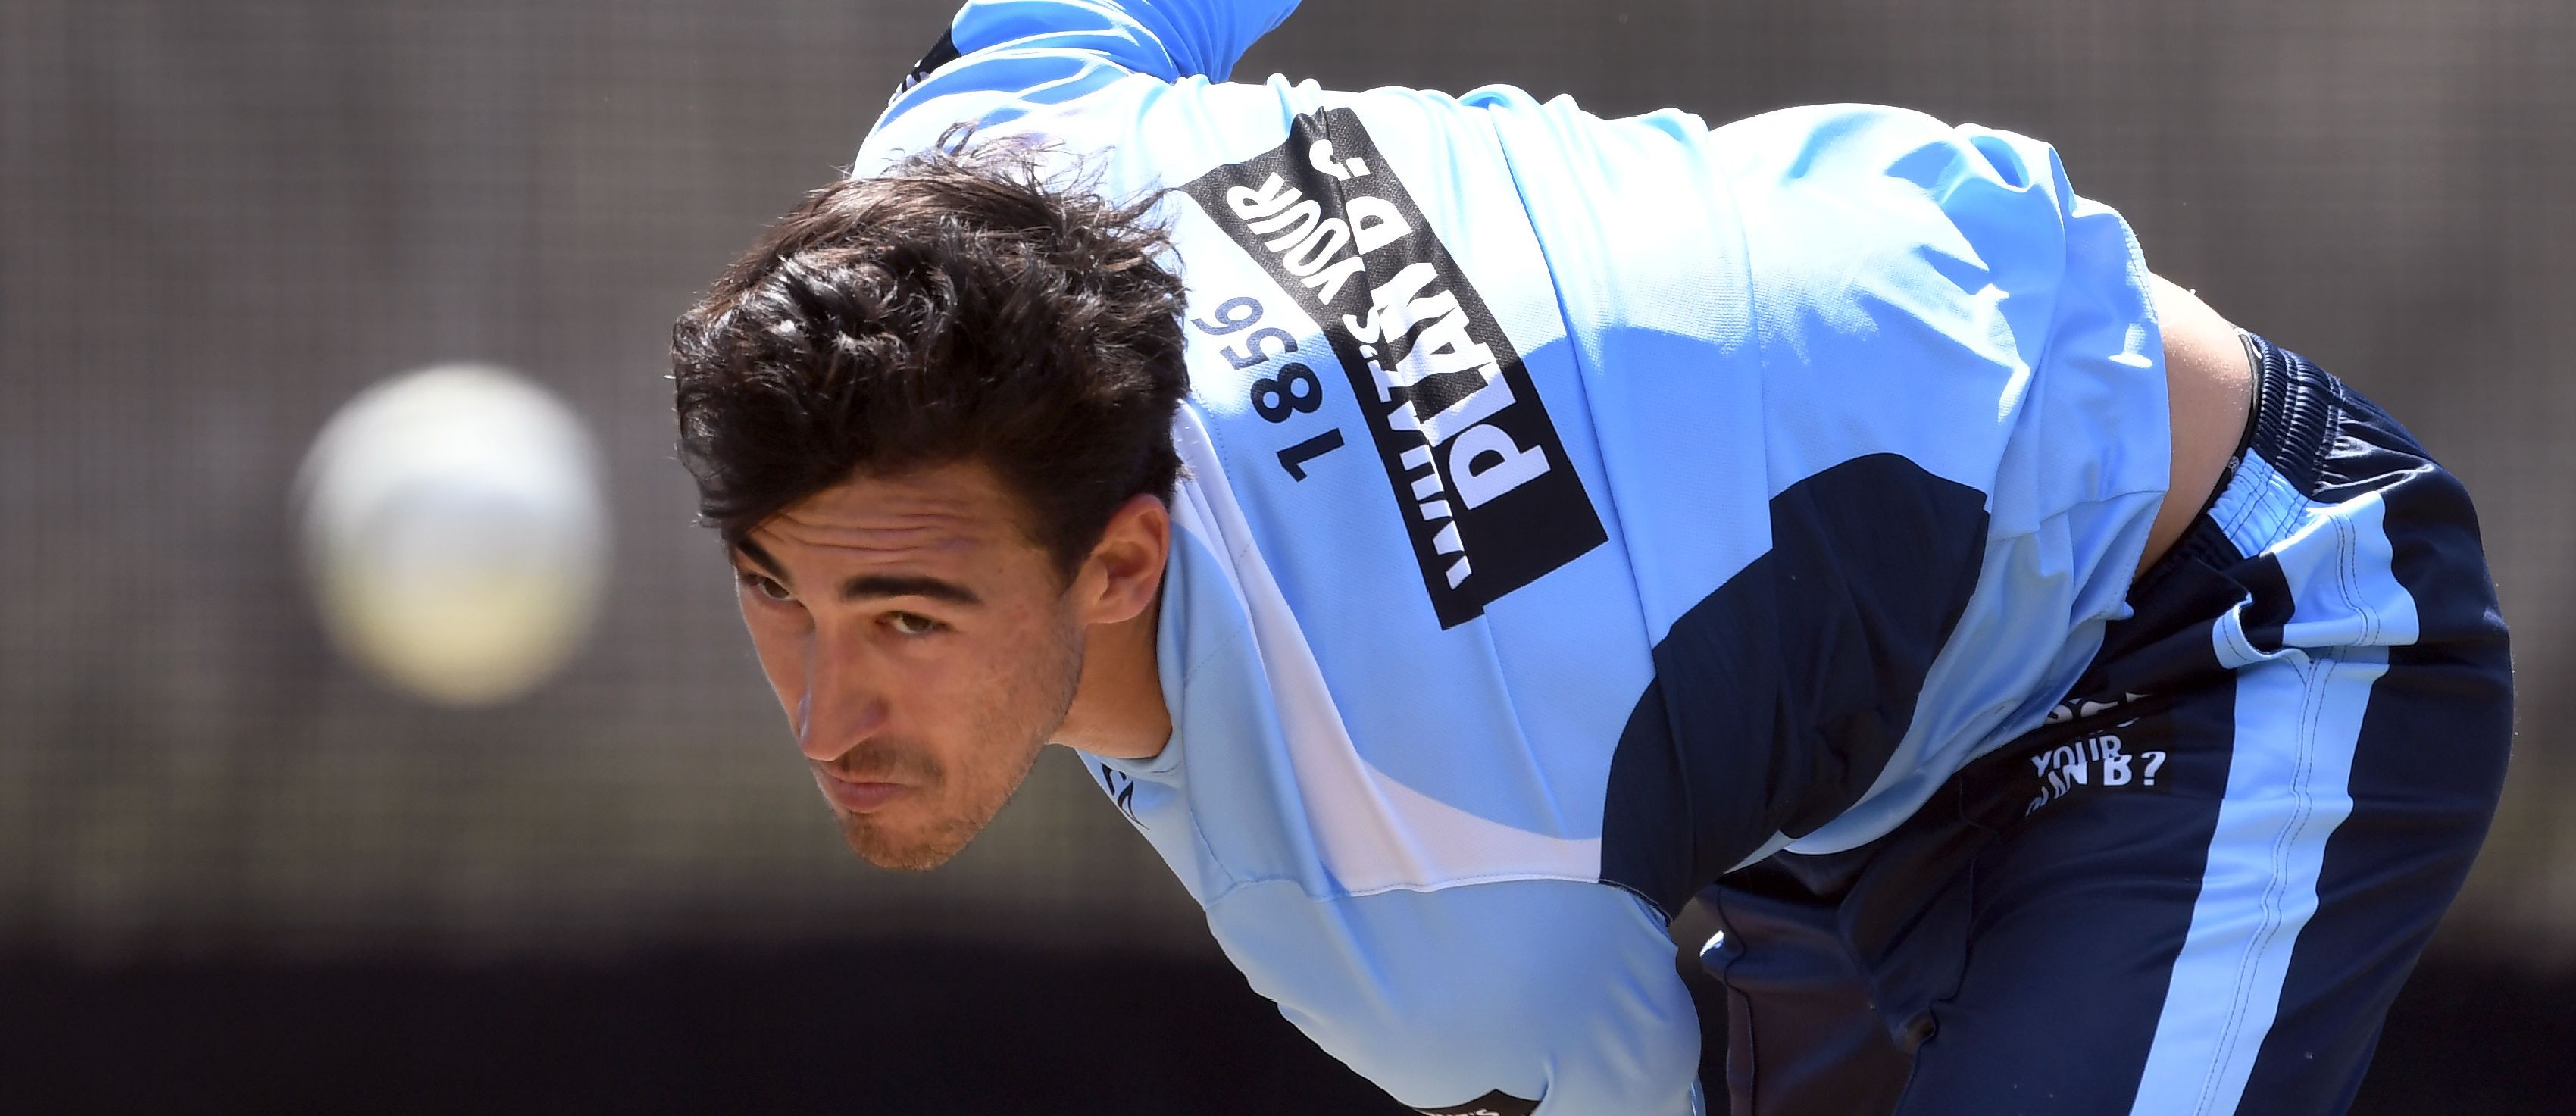 Australian fast bowler Mitchell Starc took a hat-trick in a Sheffield Shield match. Photo: AFP